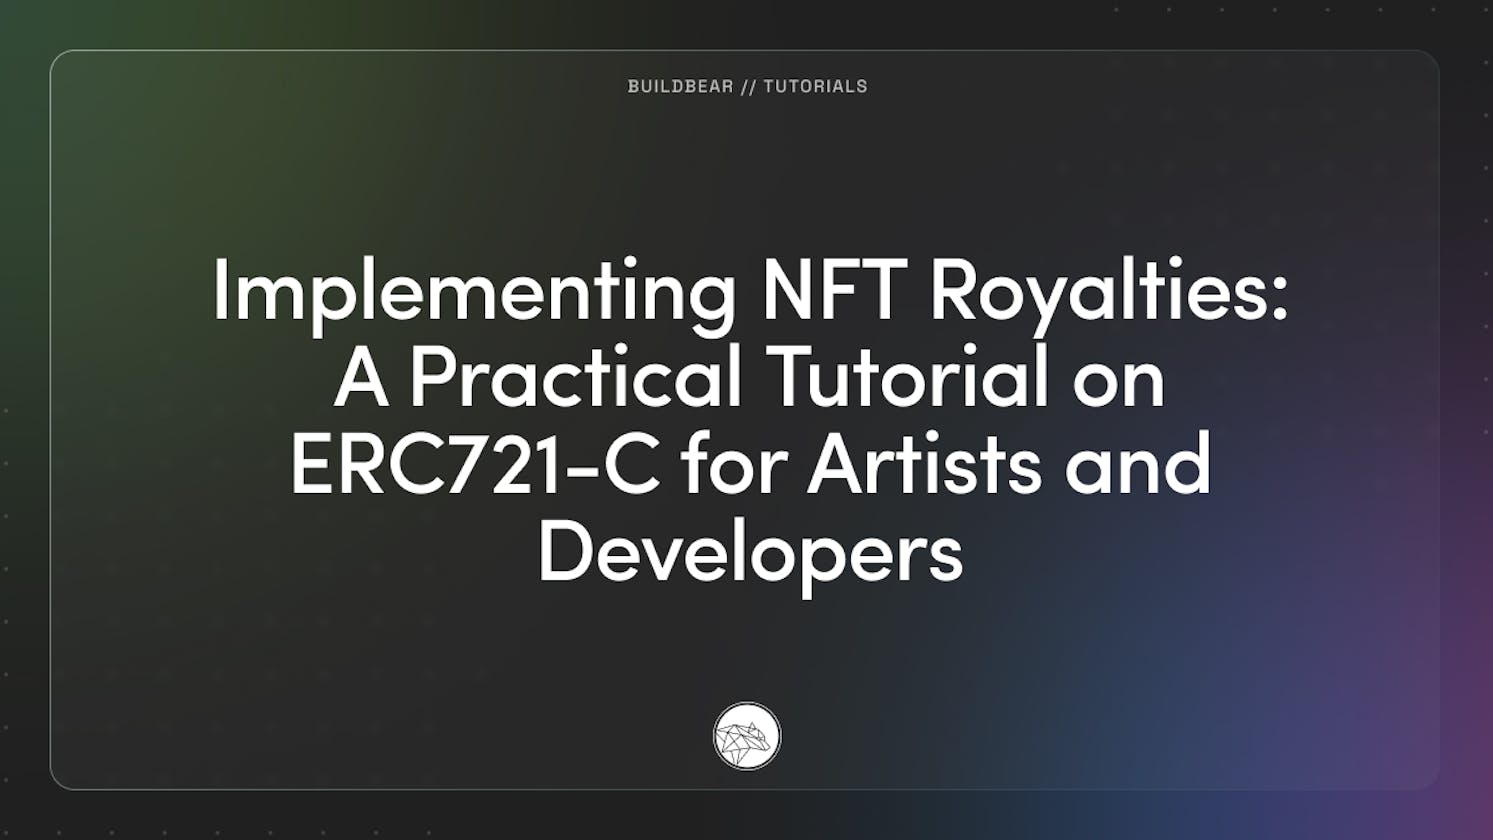 Implementing NFT Royalties: A Practical Tutorial on ERC721-C for Artists and Developers